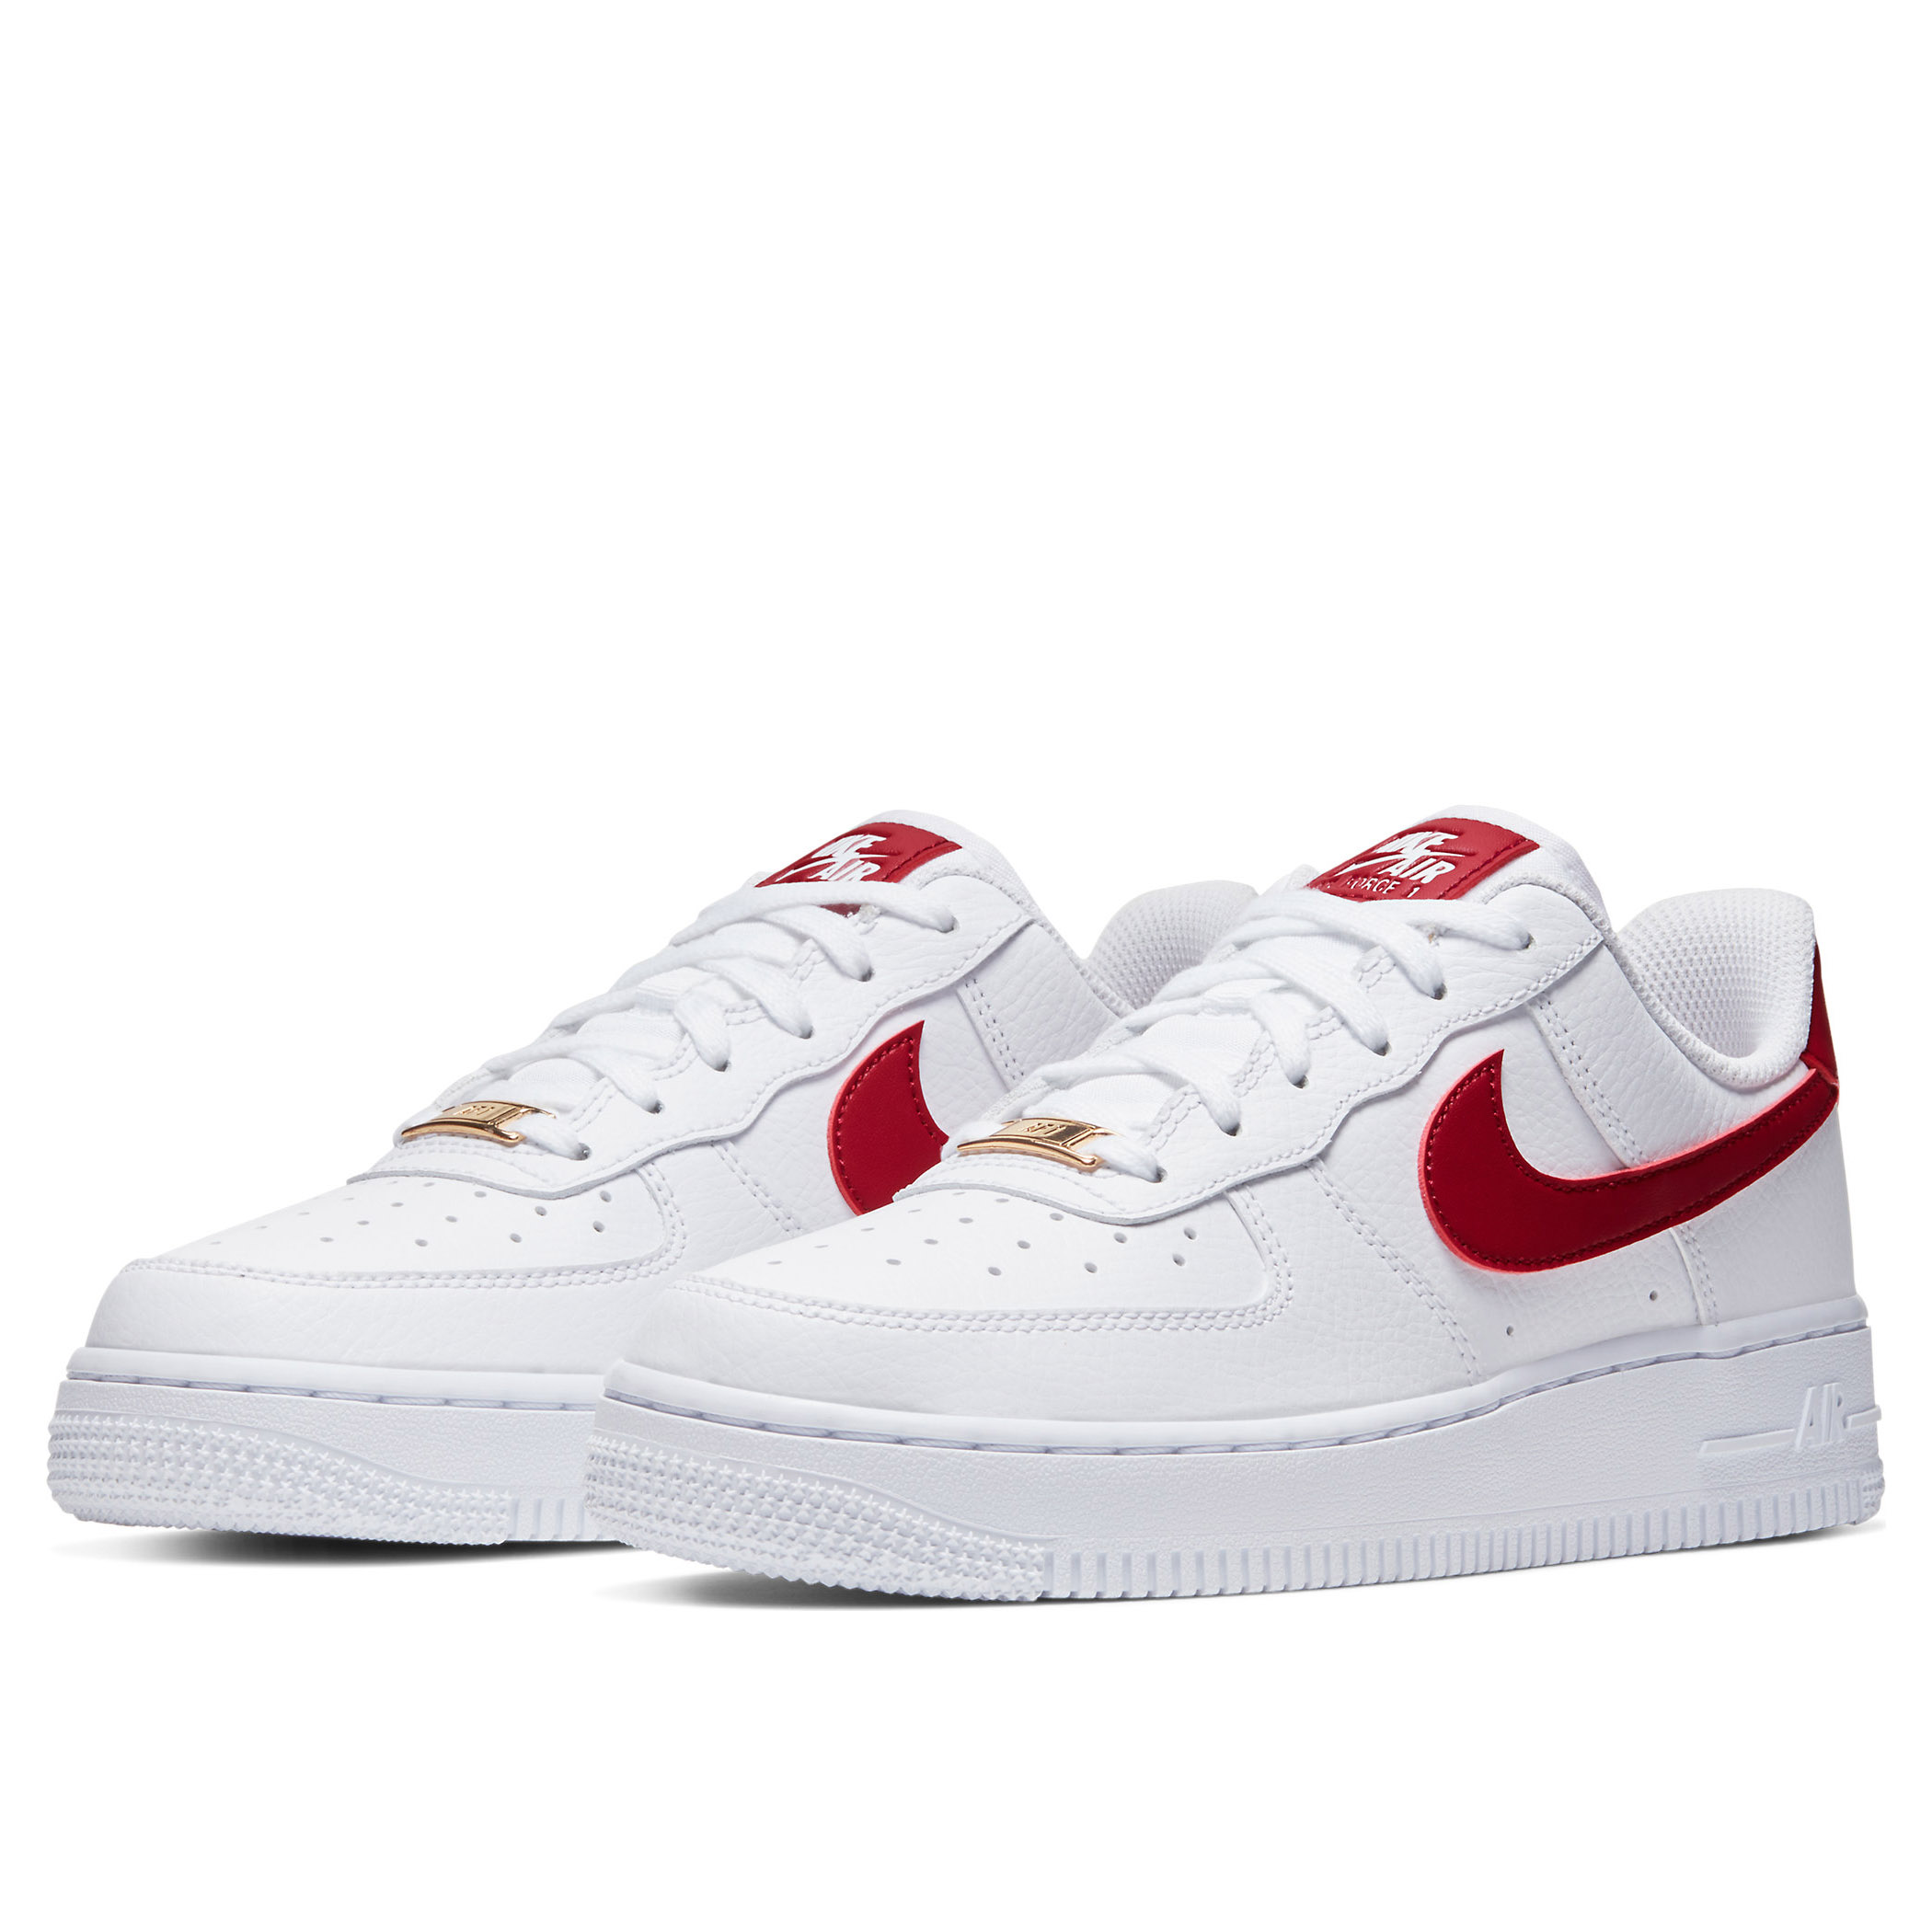 red nike air force 1 07